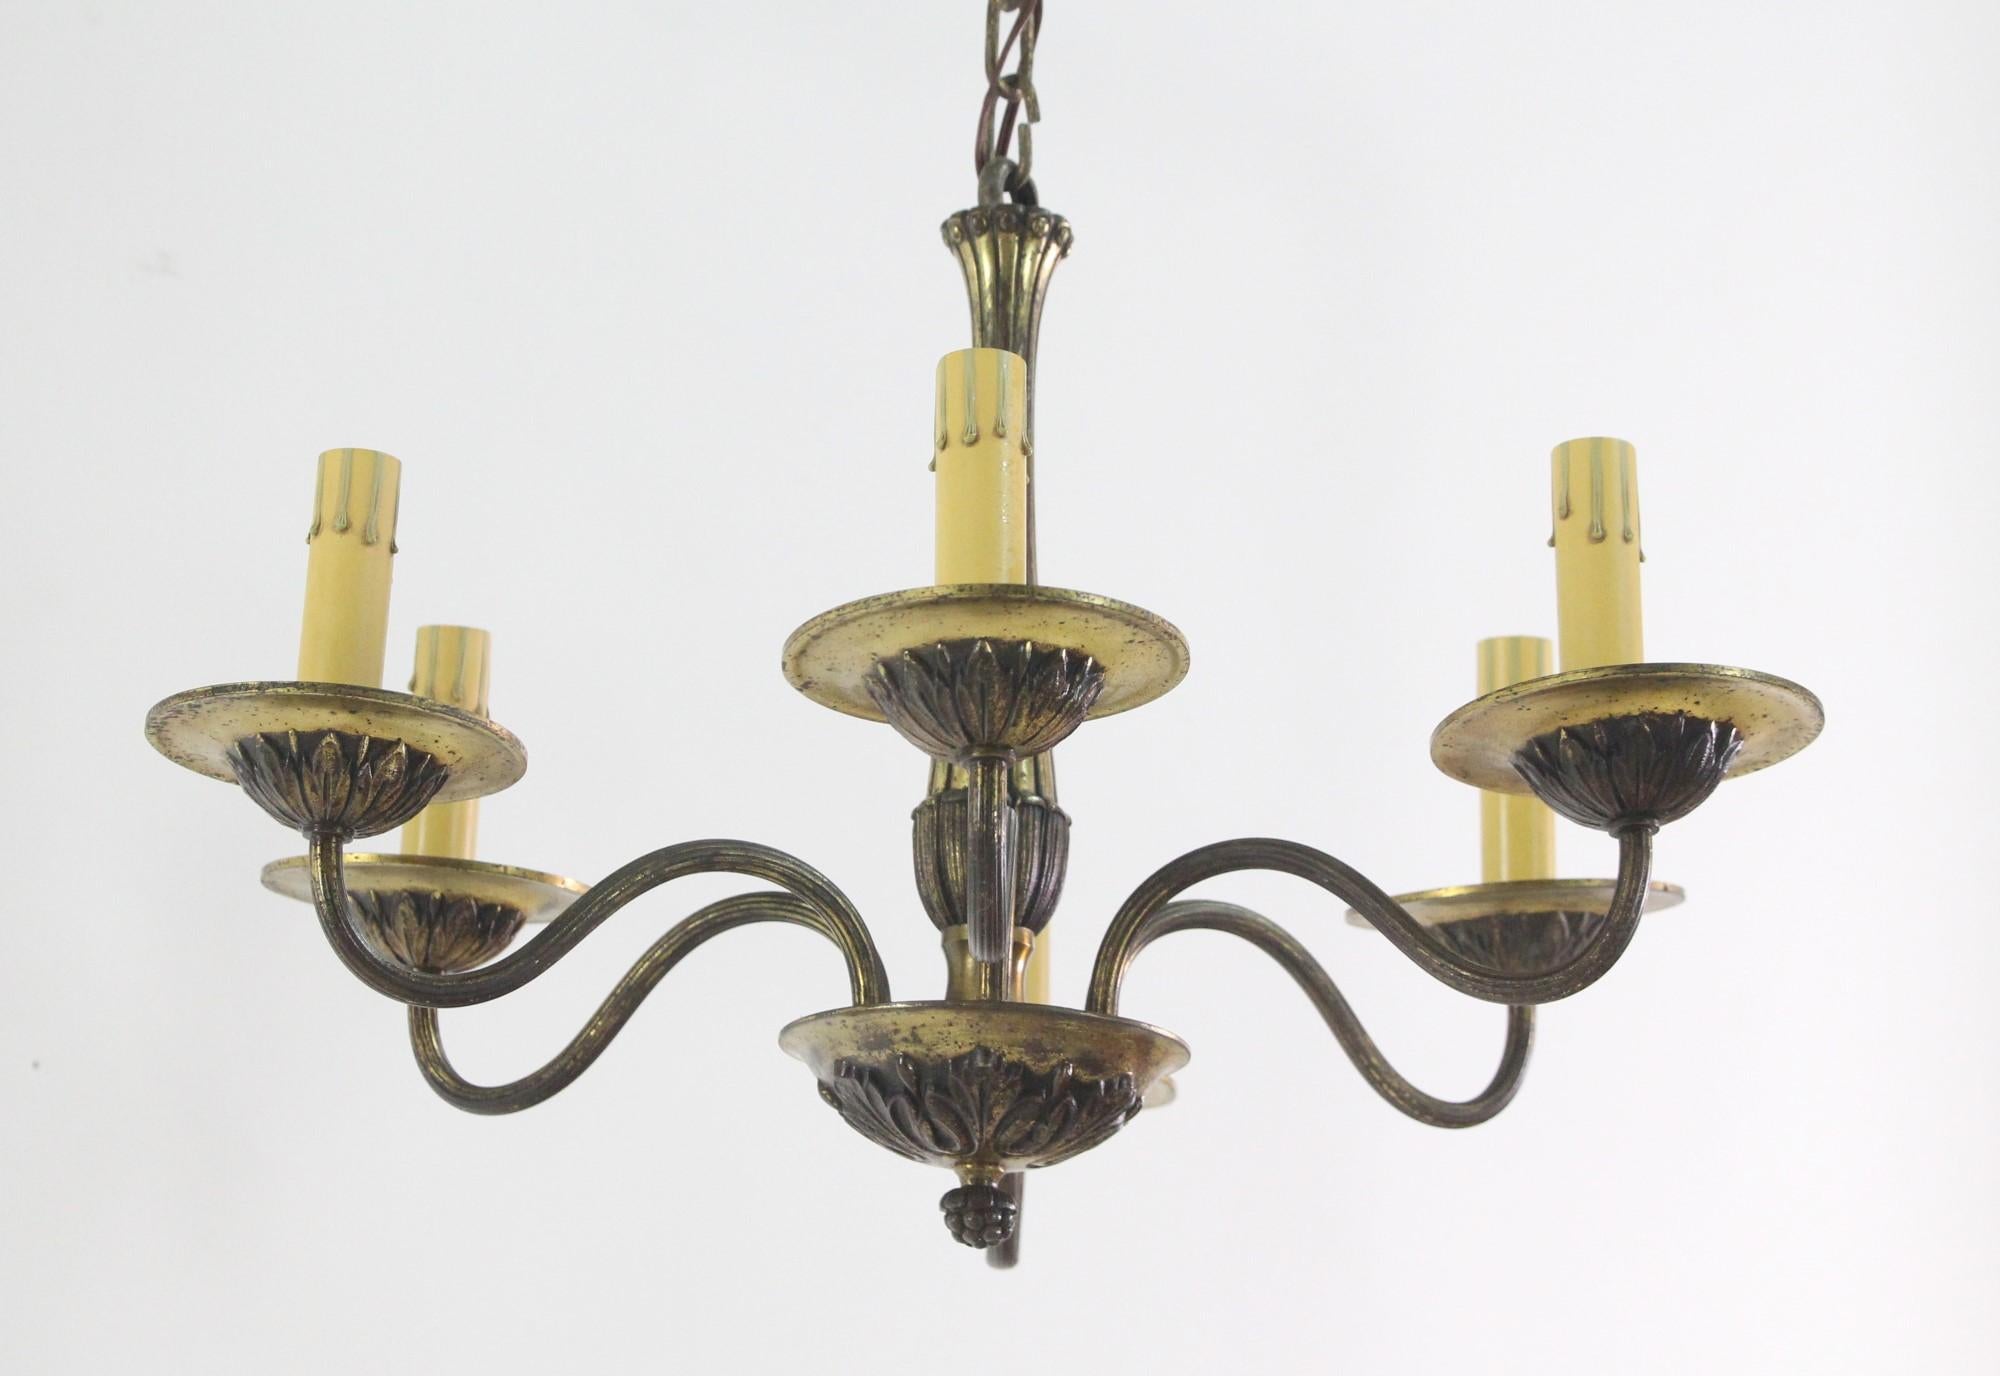 Early 1900's small French style chandelier with leaf detail and natural patina. This petite 6 arm light measures 19.5